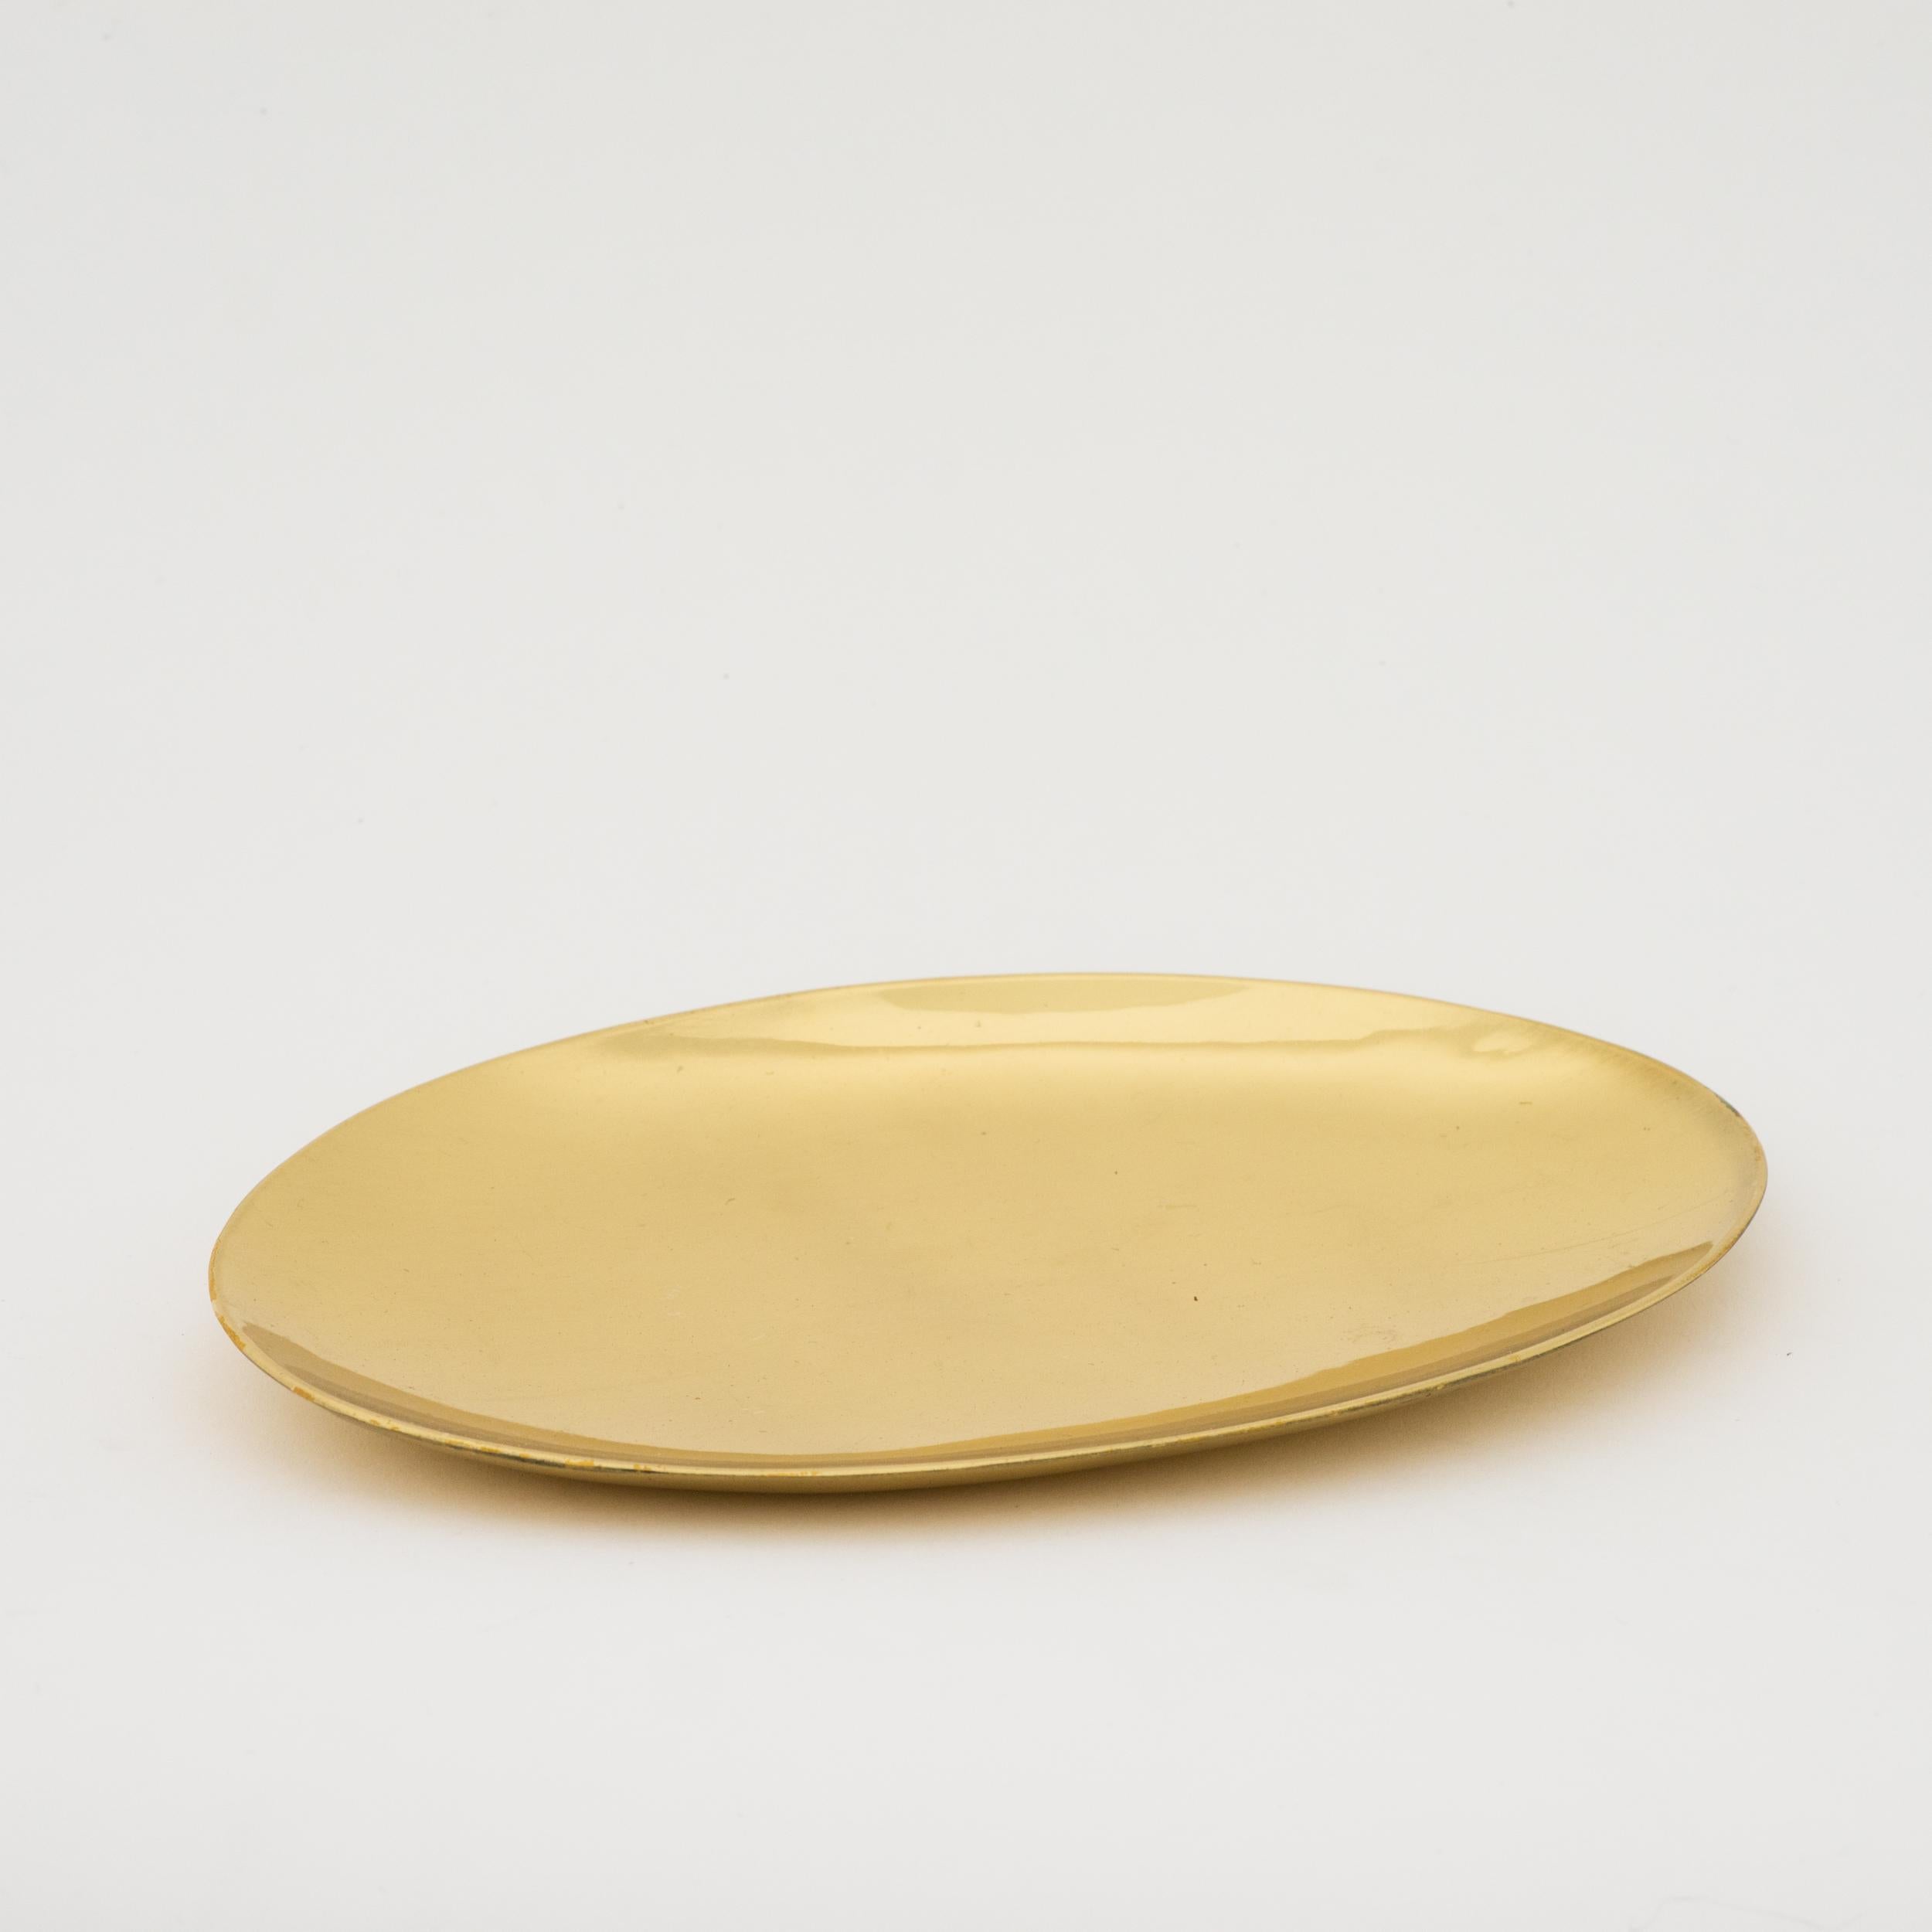 Handmade cast brass plate with a polished finish. Cast using very traditional techniques, it is polished revealing the lustrous finish of this beautiful material.

Slight variations in the patina and polished finishes, patterns and sizes are